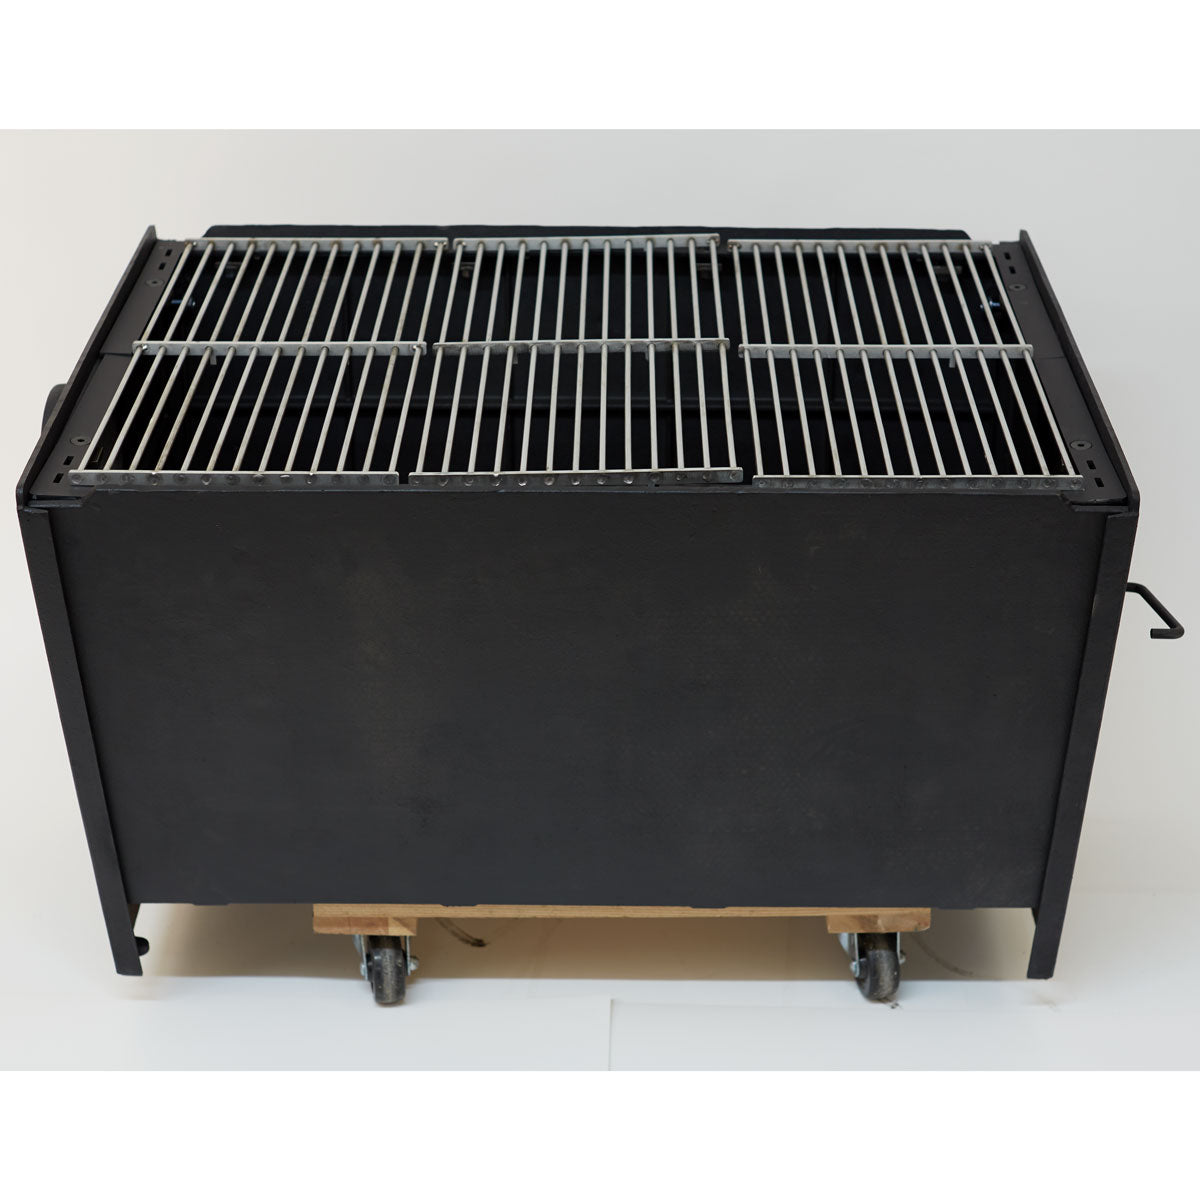 2'x3' CDL Evap-O-Grill (hobby evaporator w/flat pan and grill rack)